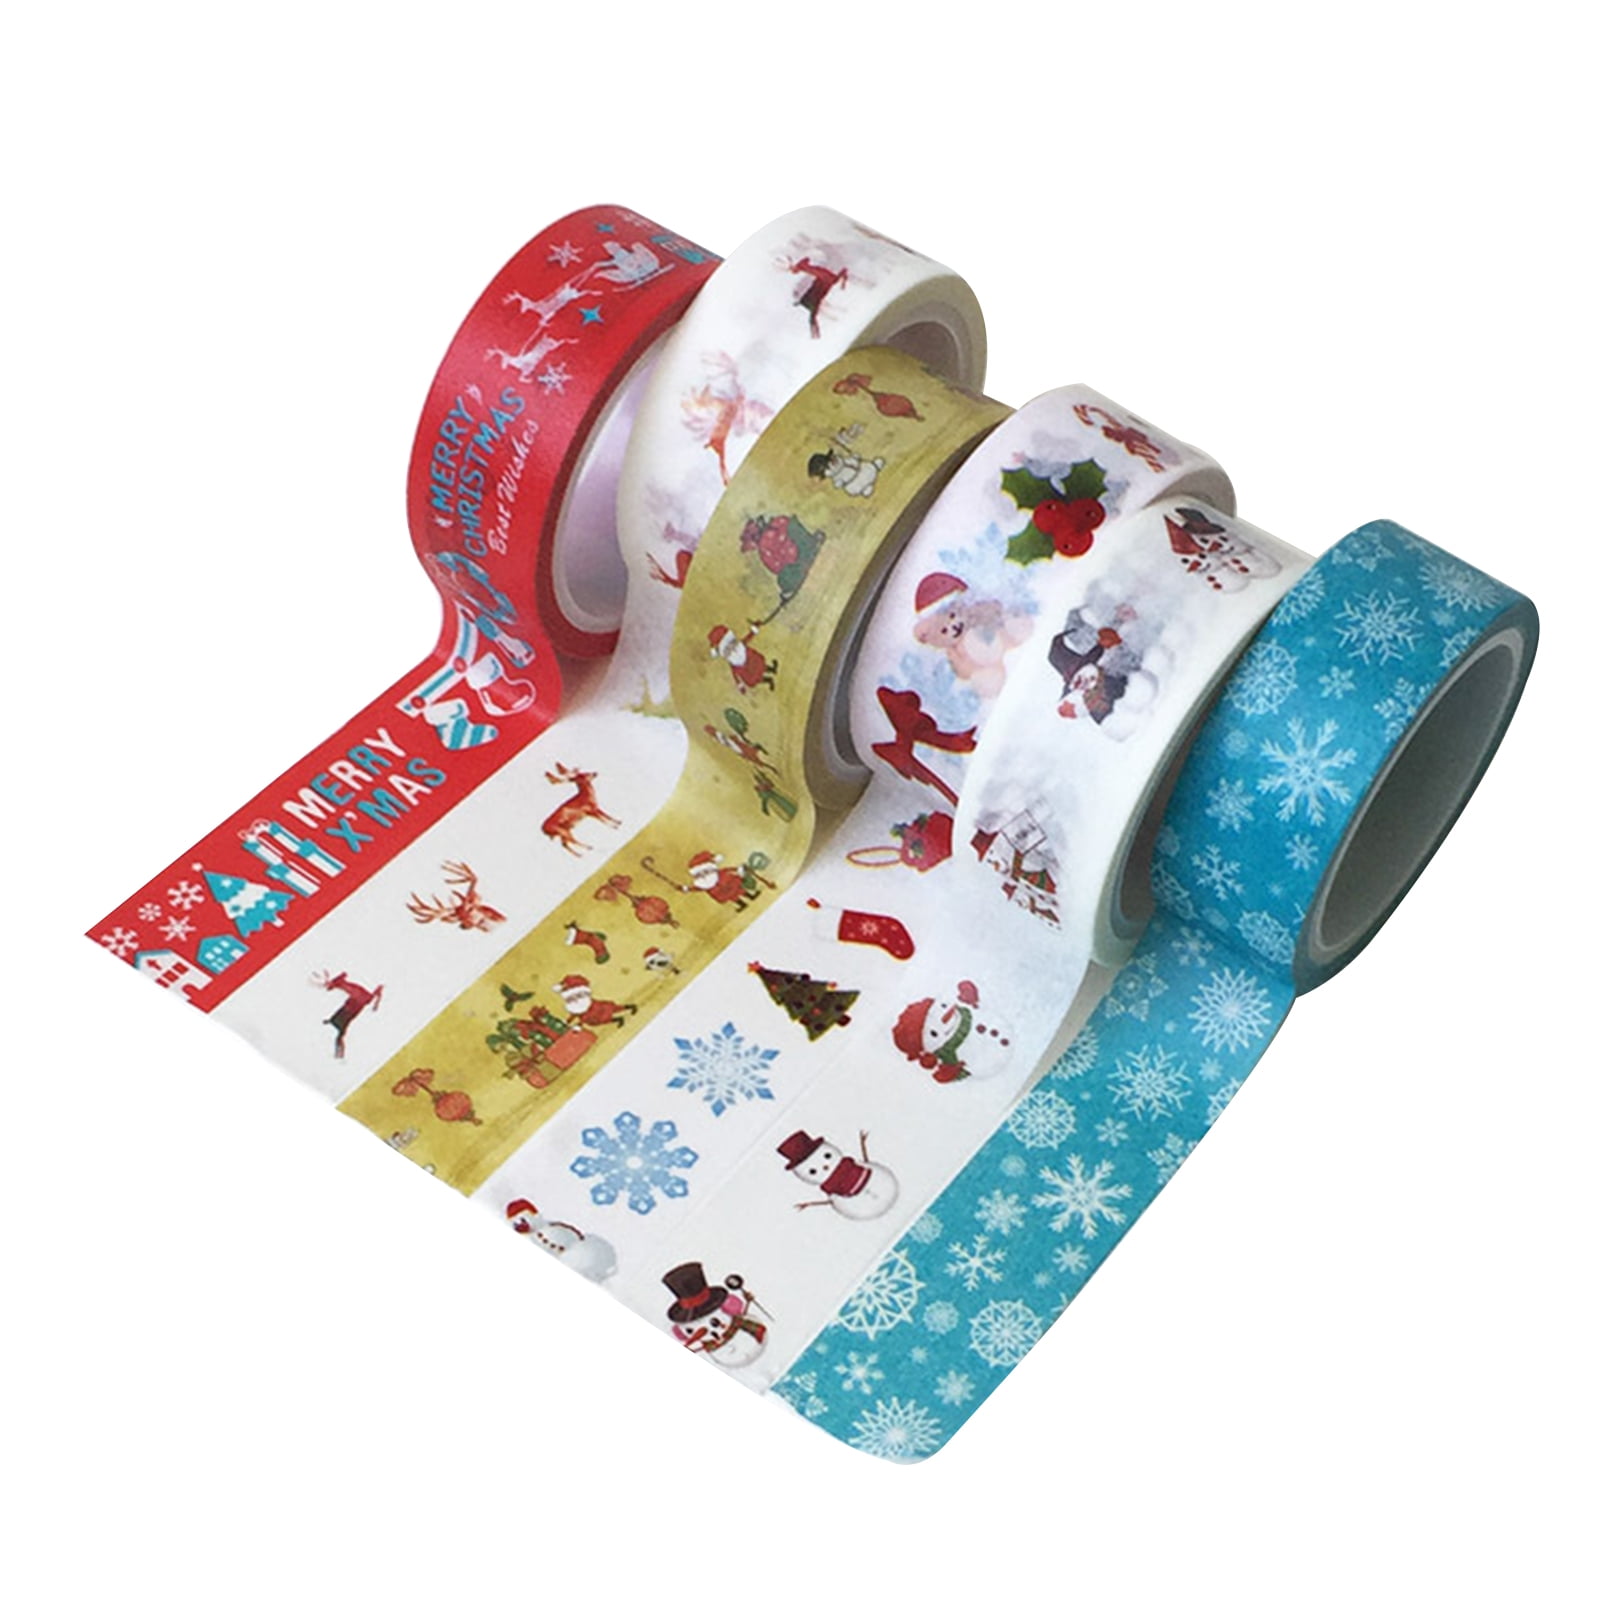 Yesbay 6 Rolls Printed Christmas Paper Ribbon DIY Craft Gift Wrapping ...